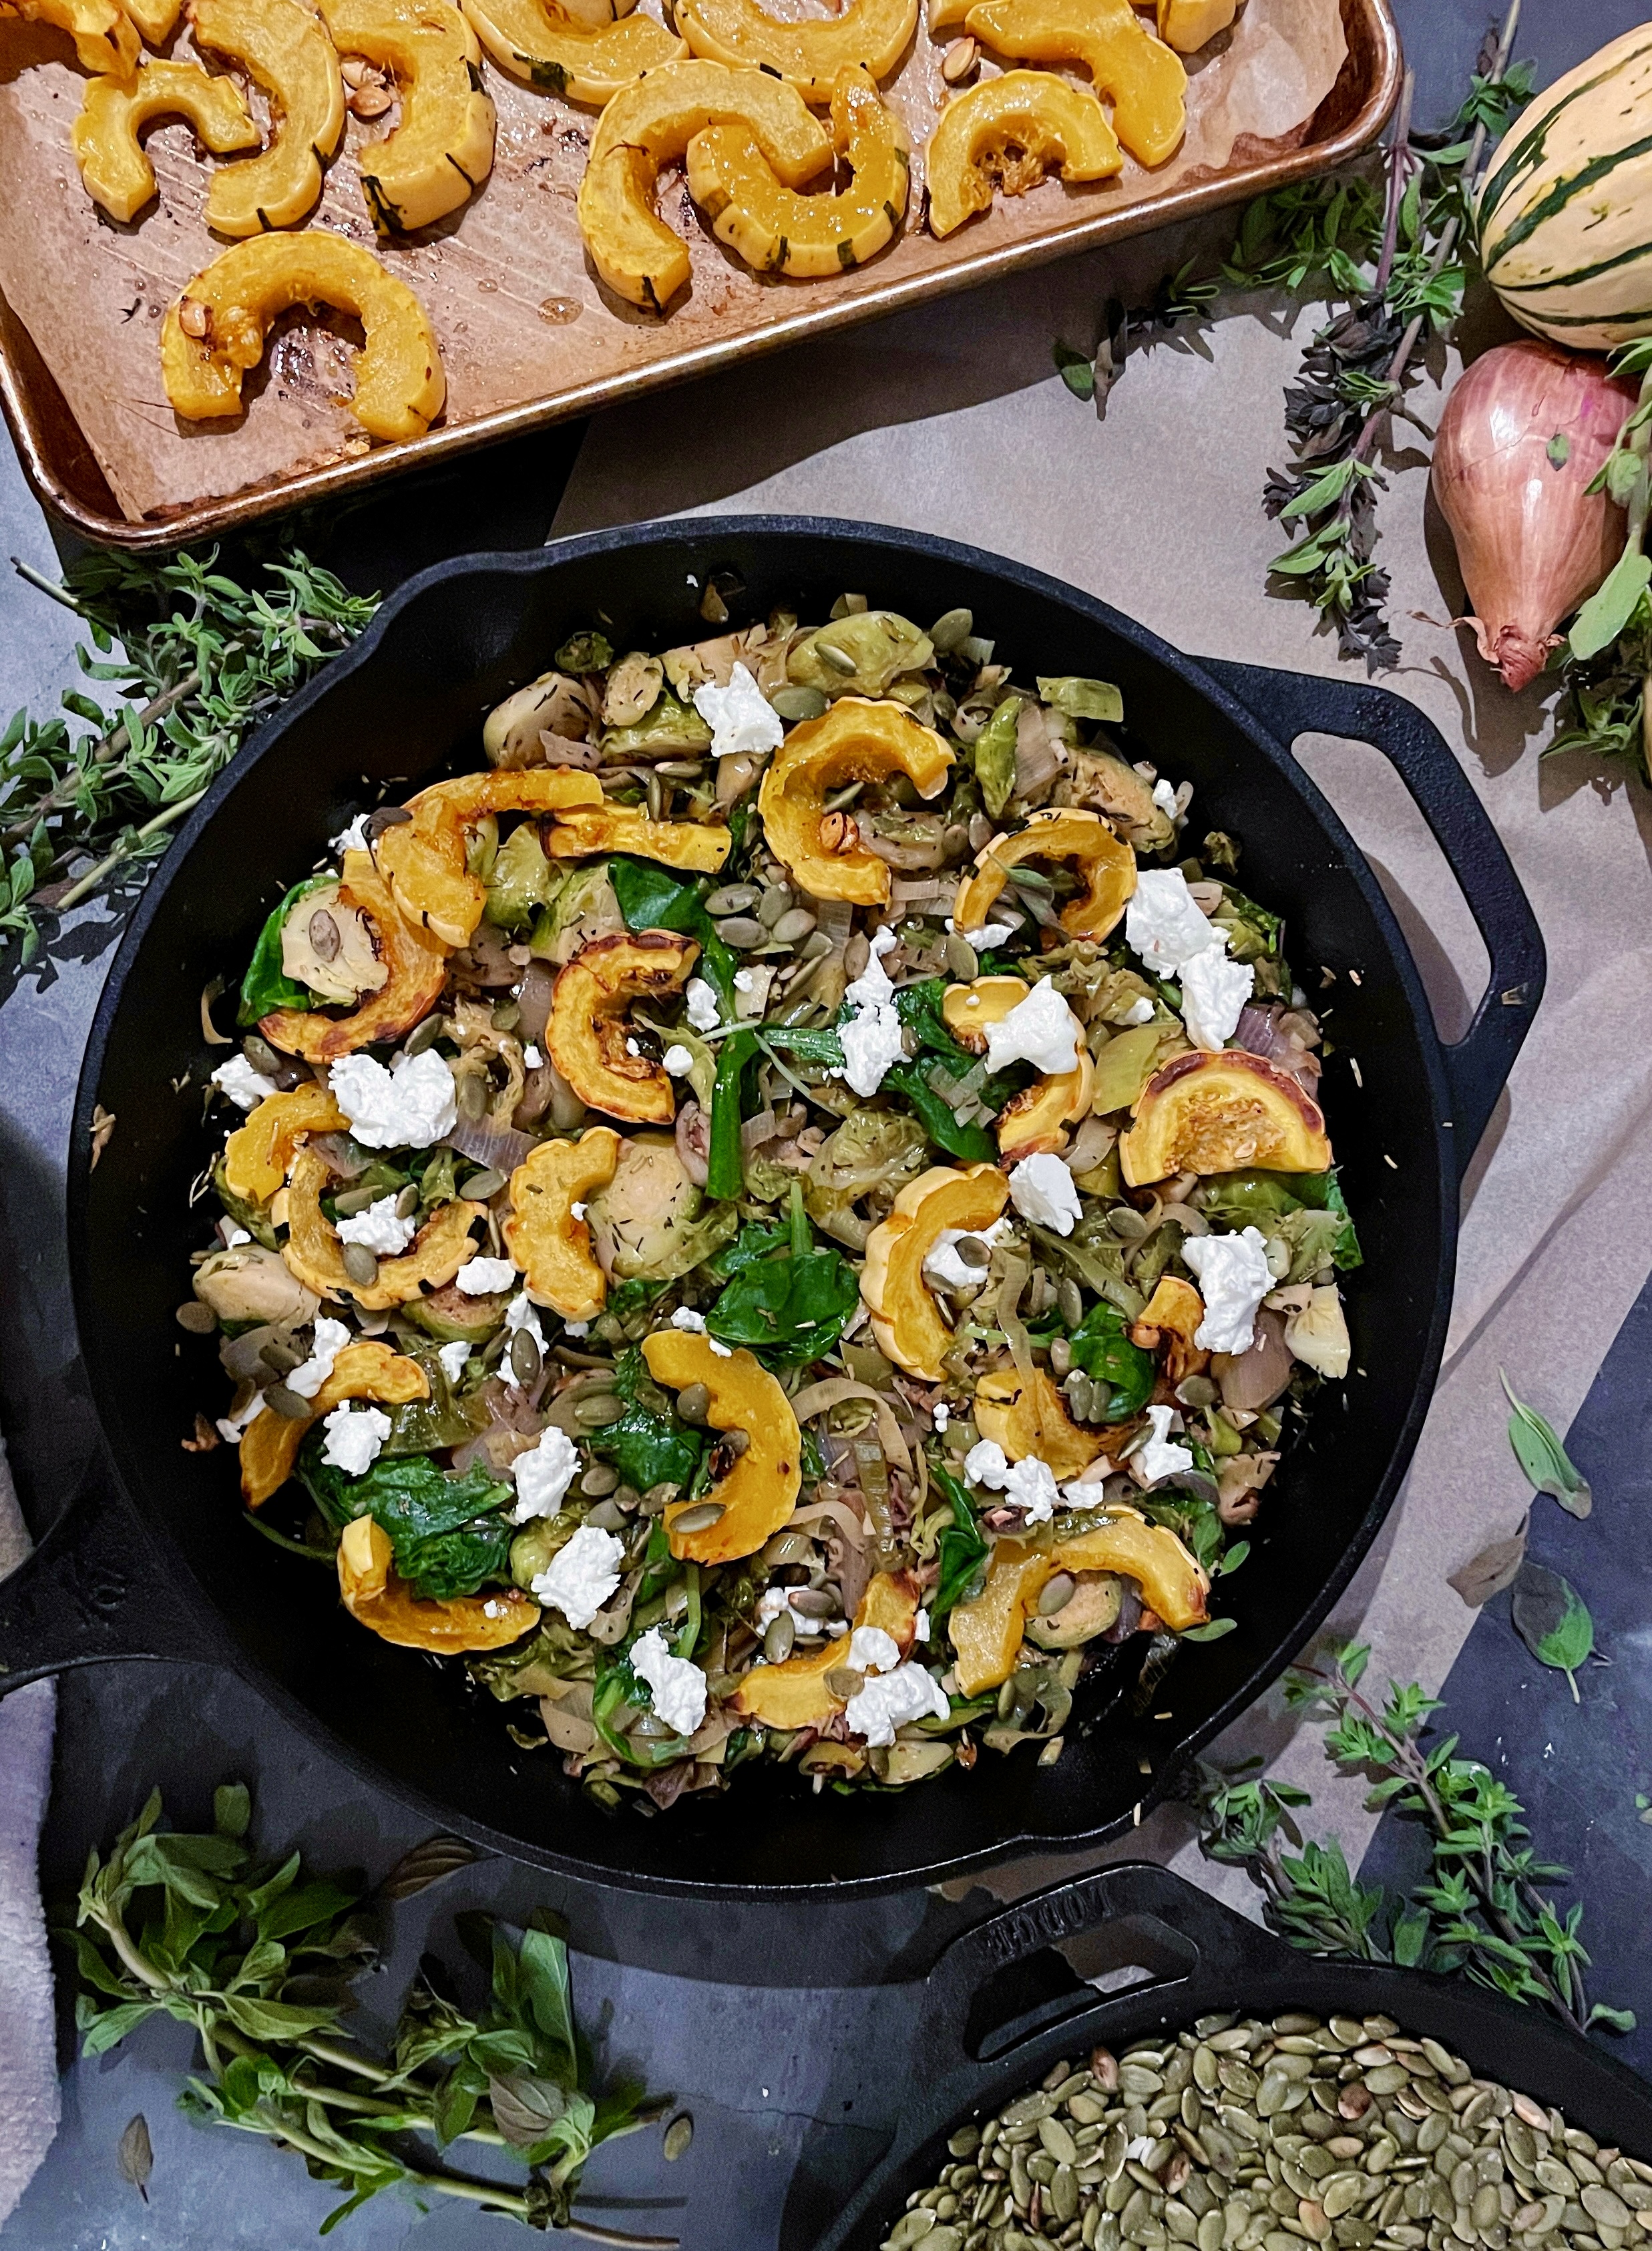 Perfectly charred roasted delicata squash with white wine apple cider wilted brussels sprouts and leeks all tossed up with some tuscan kale, creamy goat cheese, and crunchy pumpkin seeds: this Herbed Brussels, Leeks, and Roasted Delicata Squash Hash is my favorite way to use up all those fall veggies!!